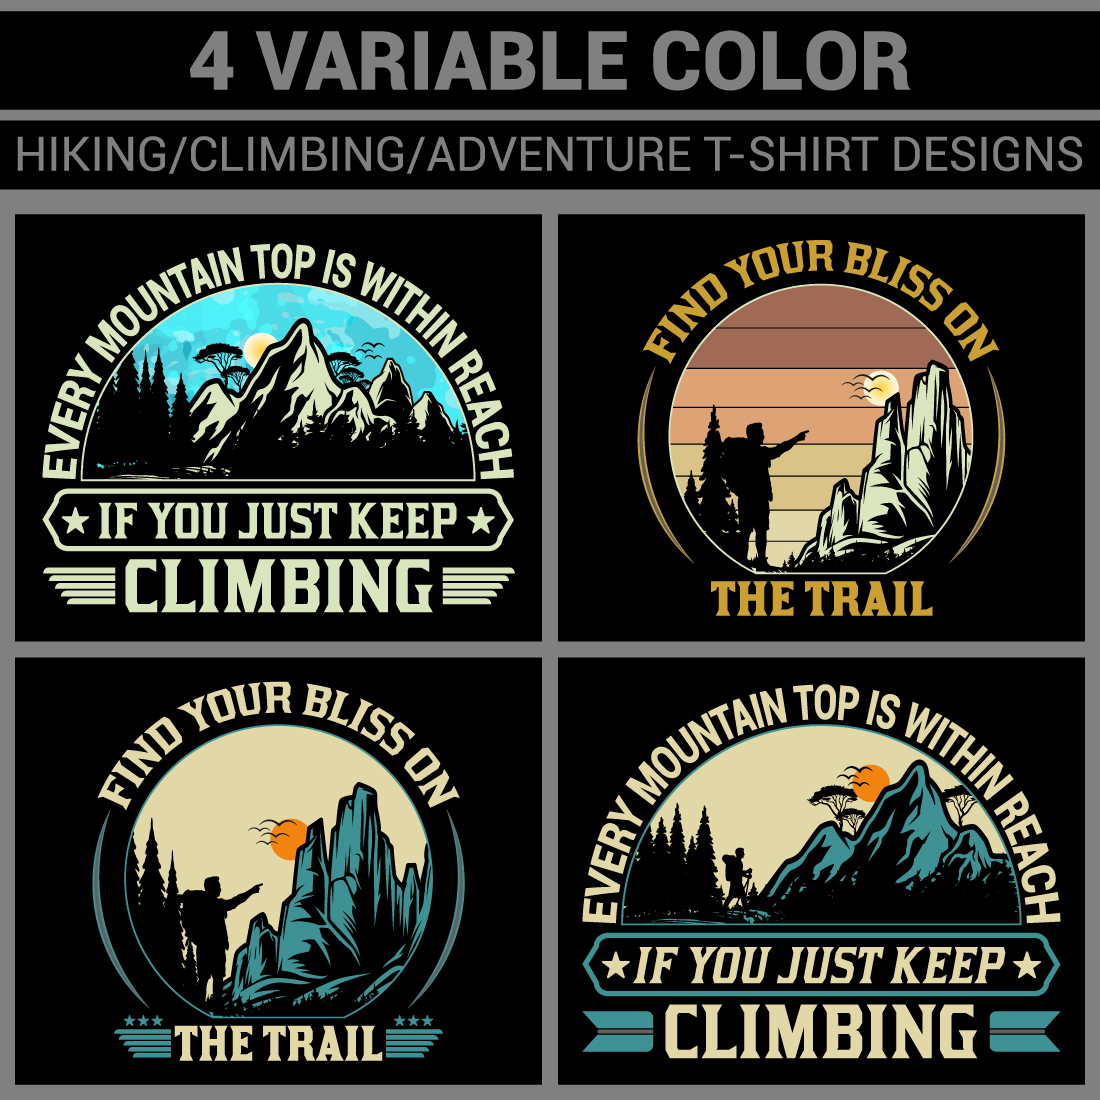 4 Variable Color HIKING/CLIMBING/ADVENTURE/OUTDOORS/TRAVEL T-Shirt Designs cover image.